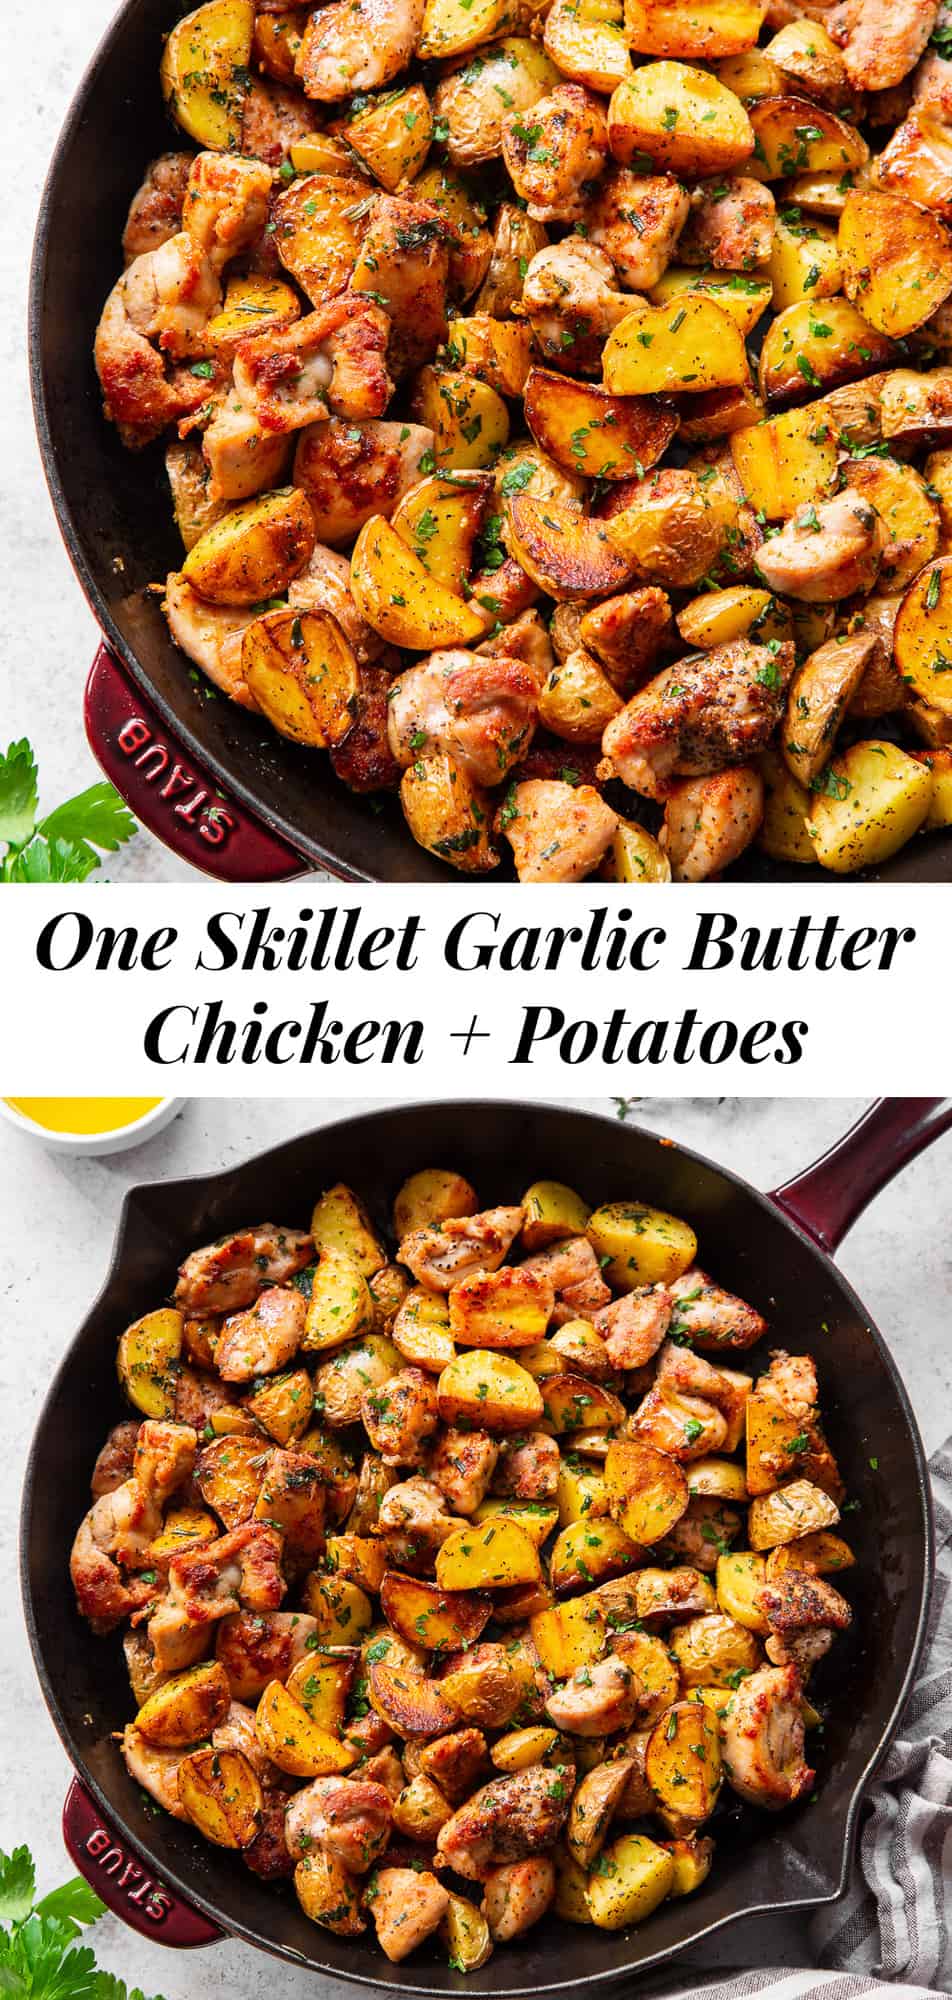 This flavorful Garlic Butter Chicken and Potato Skillet is an easy 30 minute meal that everyone will love! It’s naturally gluten free, paleo, and Whole30 friendly. Loads of garlic and fresh herbs with perfectly seasoned chicken and potatoes will make you want this meal on repeat! #paleo #whole30 #cleaneating